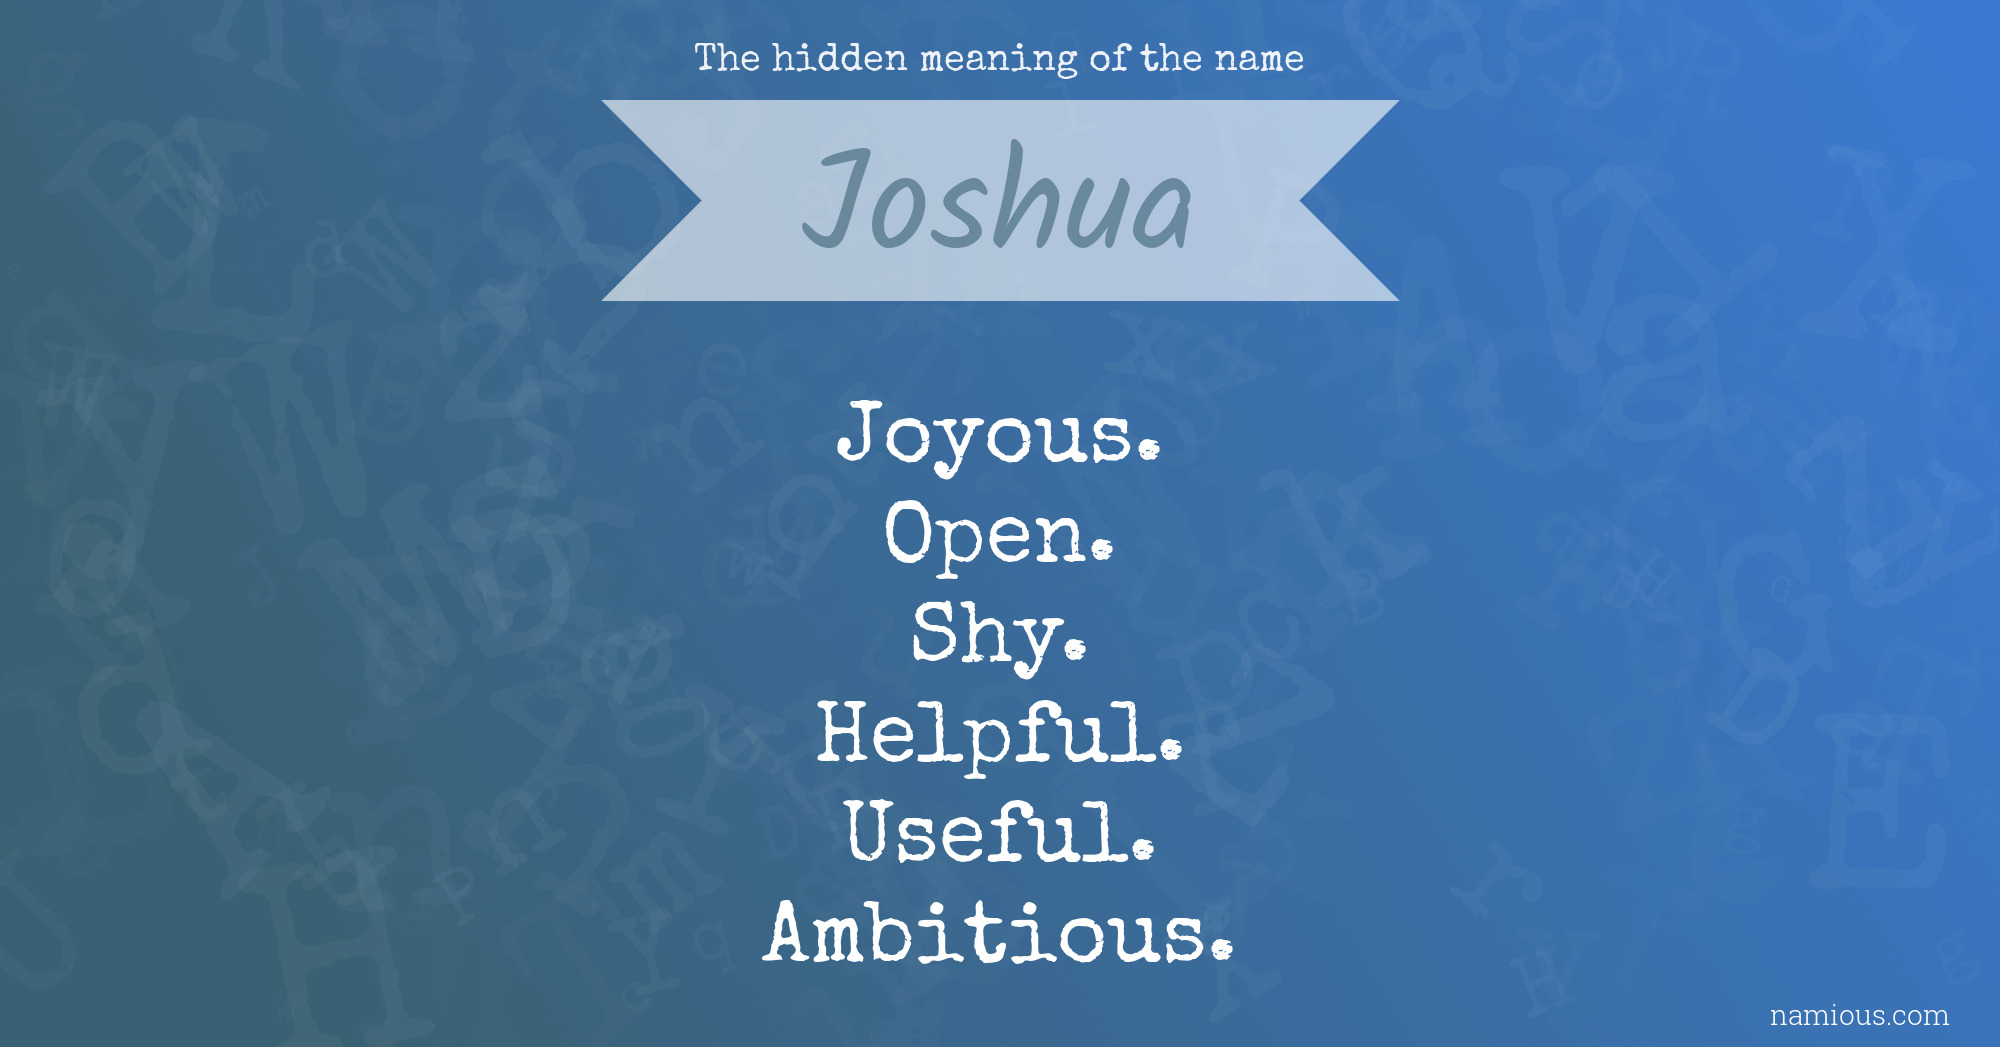 The hidden meaning of the name Joshua